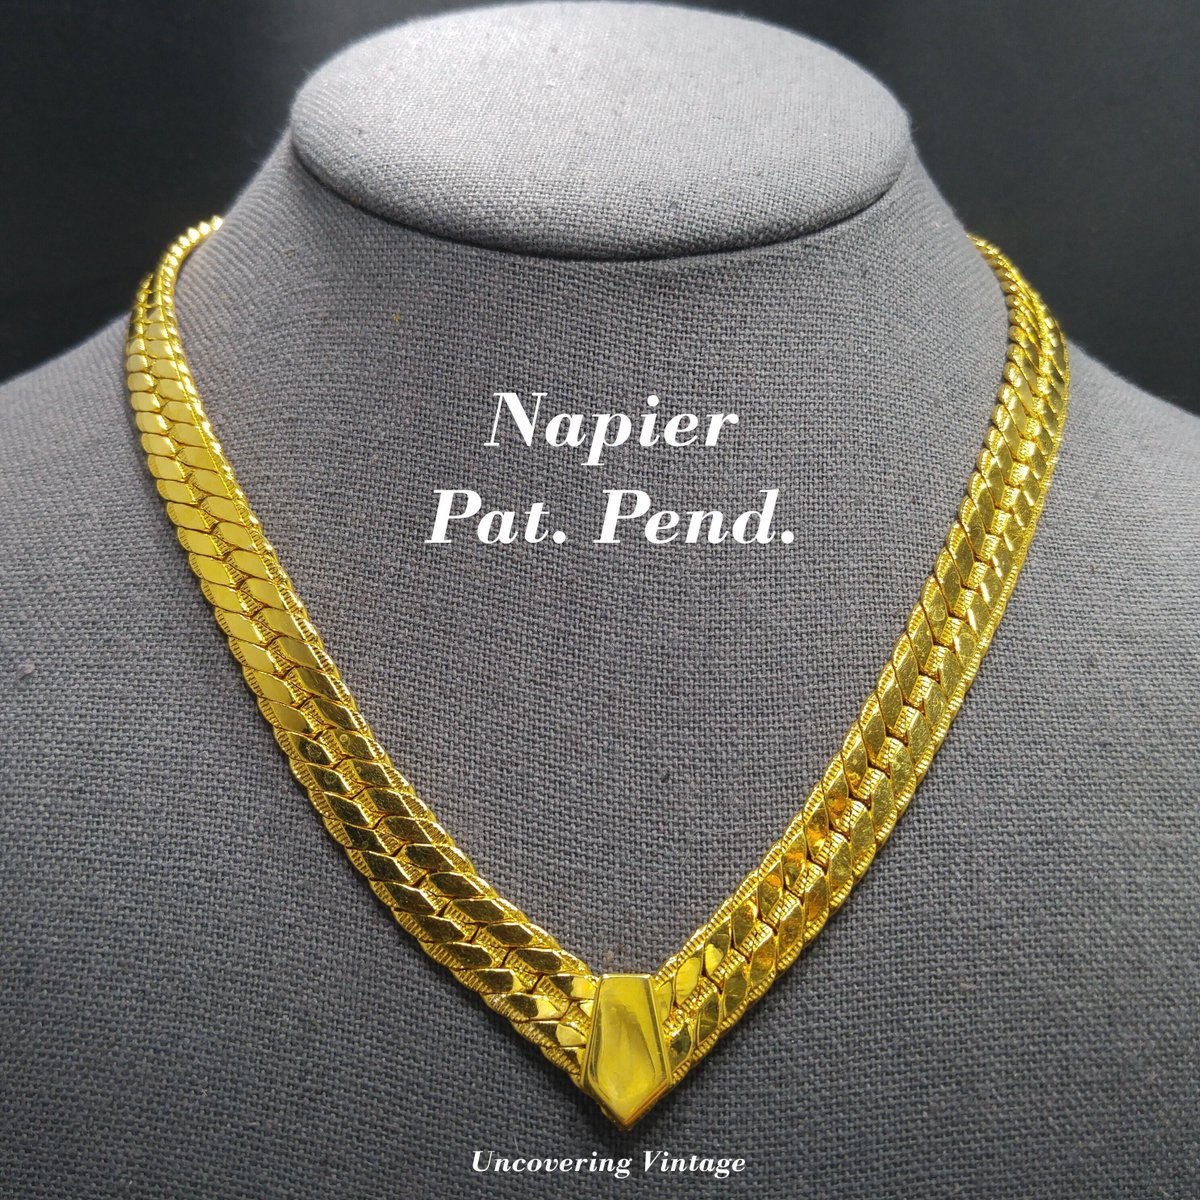 #etsy shop: Napier Gold Plated Herringbone V Chain Necklace, Signed Napier Pat Pend, 1980s Vintage Jewelry etsy.me/3Kn8EGO #gold #herringbone #women #hingedclip #herringbonenecklace #napierpatpend #napiernecklace #goldplated #chainnecklace